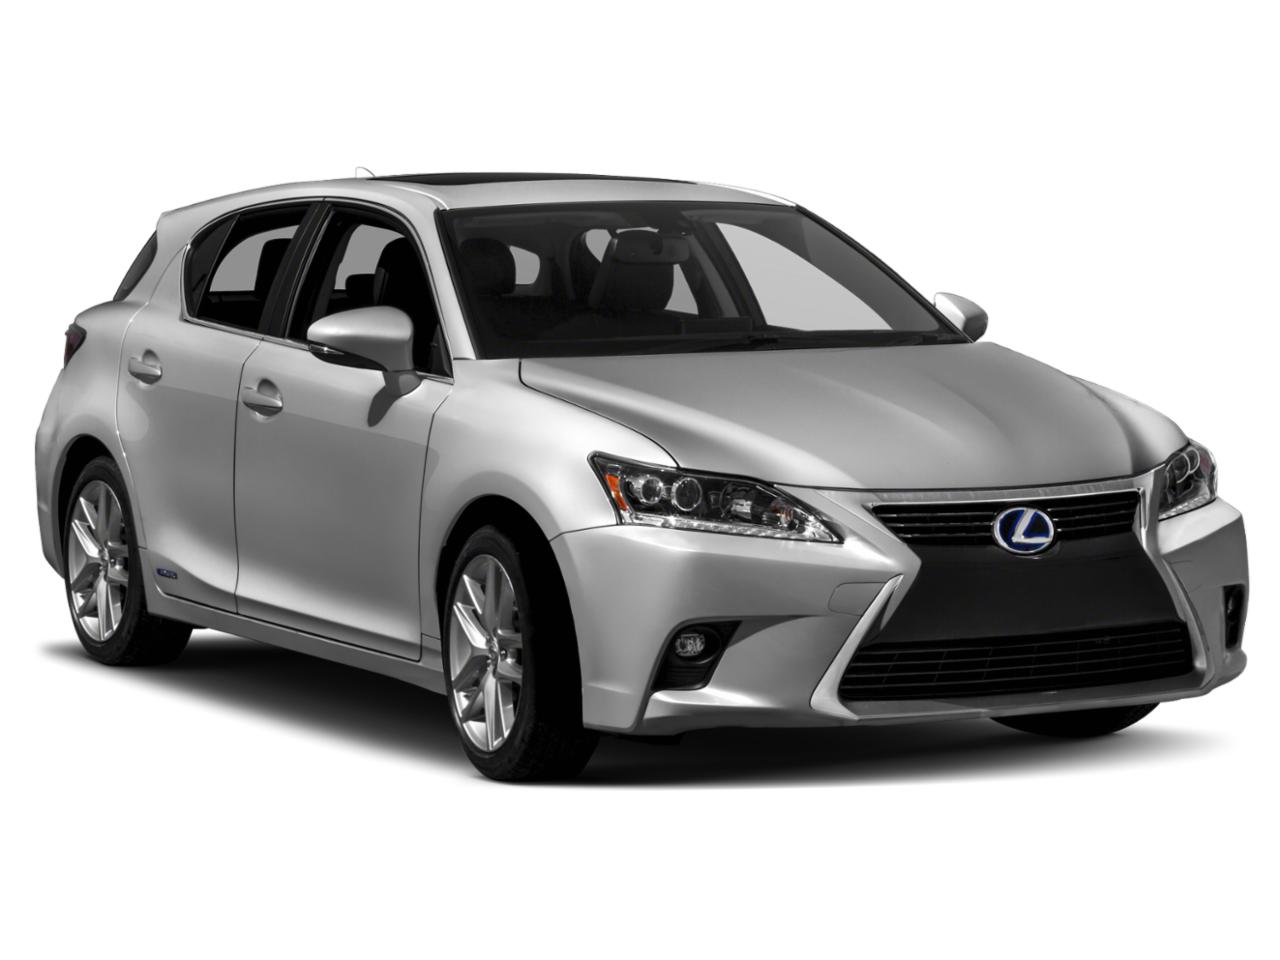 2015 Lexus CT 200h Vehicle Photo in Clearwater, FL 33761